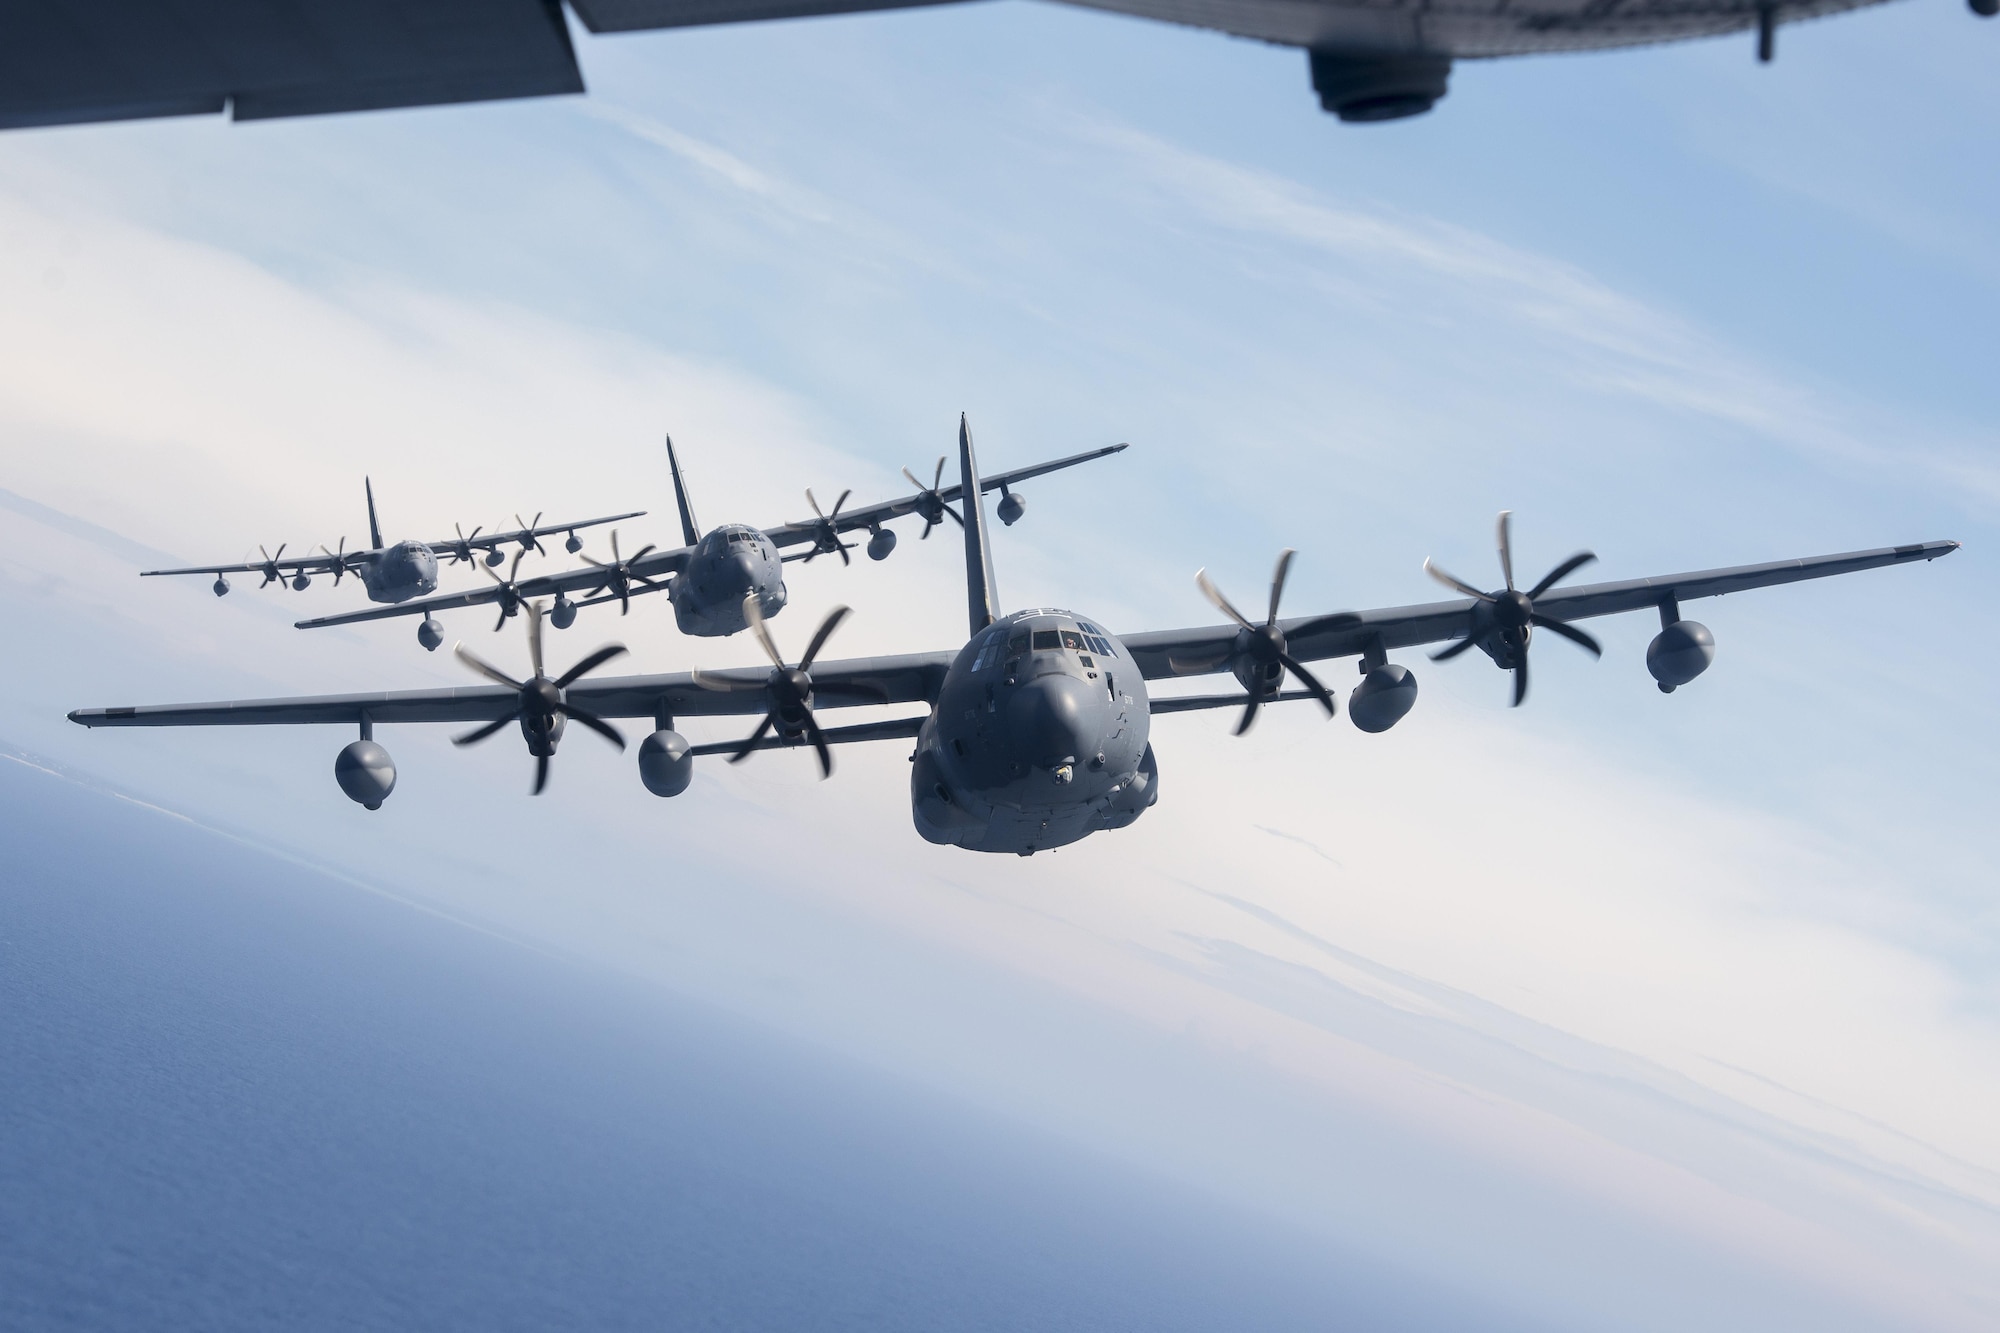 U.S. Air Force MC-130J Commando IIs from the 17th Special Operations Squadron line up in a five-aircraft formation June 22, 2017 off the coast of Okinawa, Japan, during a mass launch training mission. The MC-130J Commando II is a multi-mission combat transport/special operations tanker capable of delivering a payload of 42,000 pounds. (U.S. Air Force photo by Senior Airman John Linzmeier)